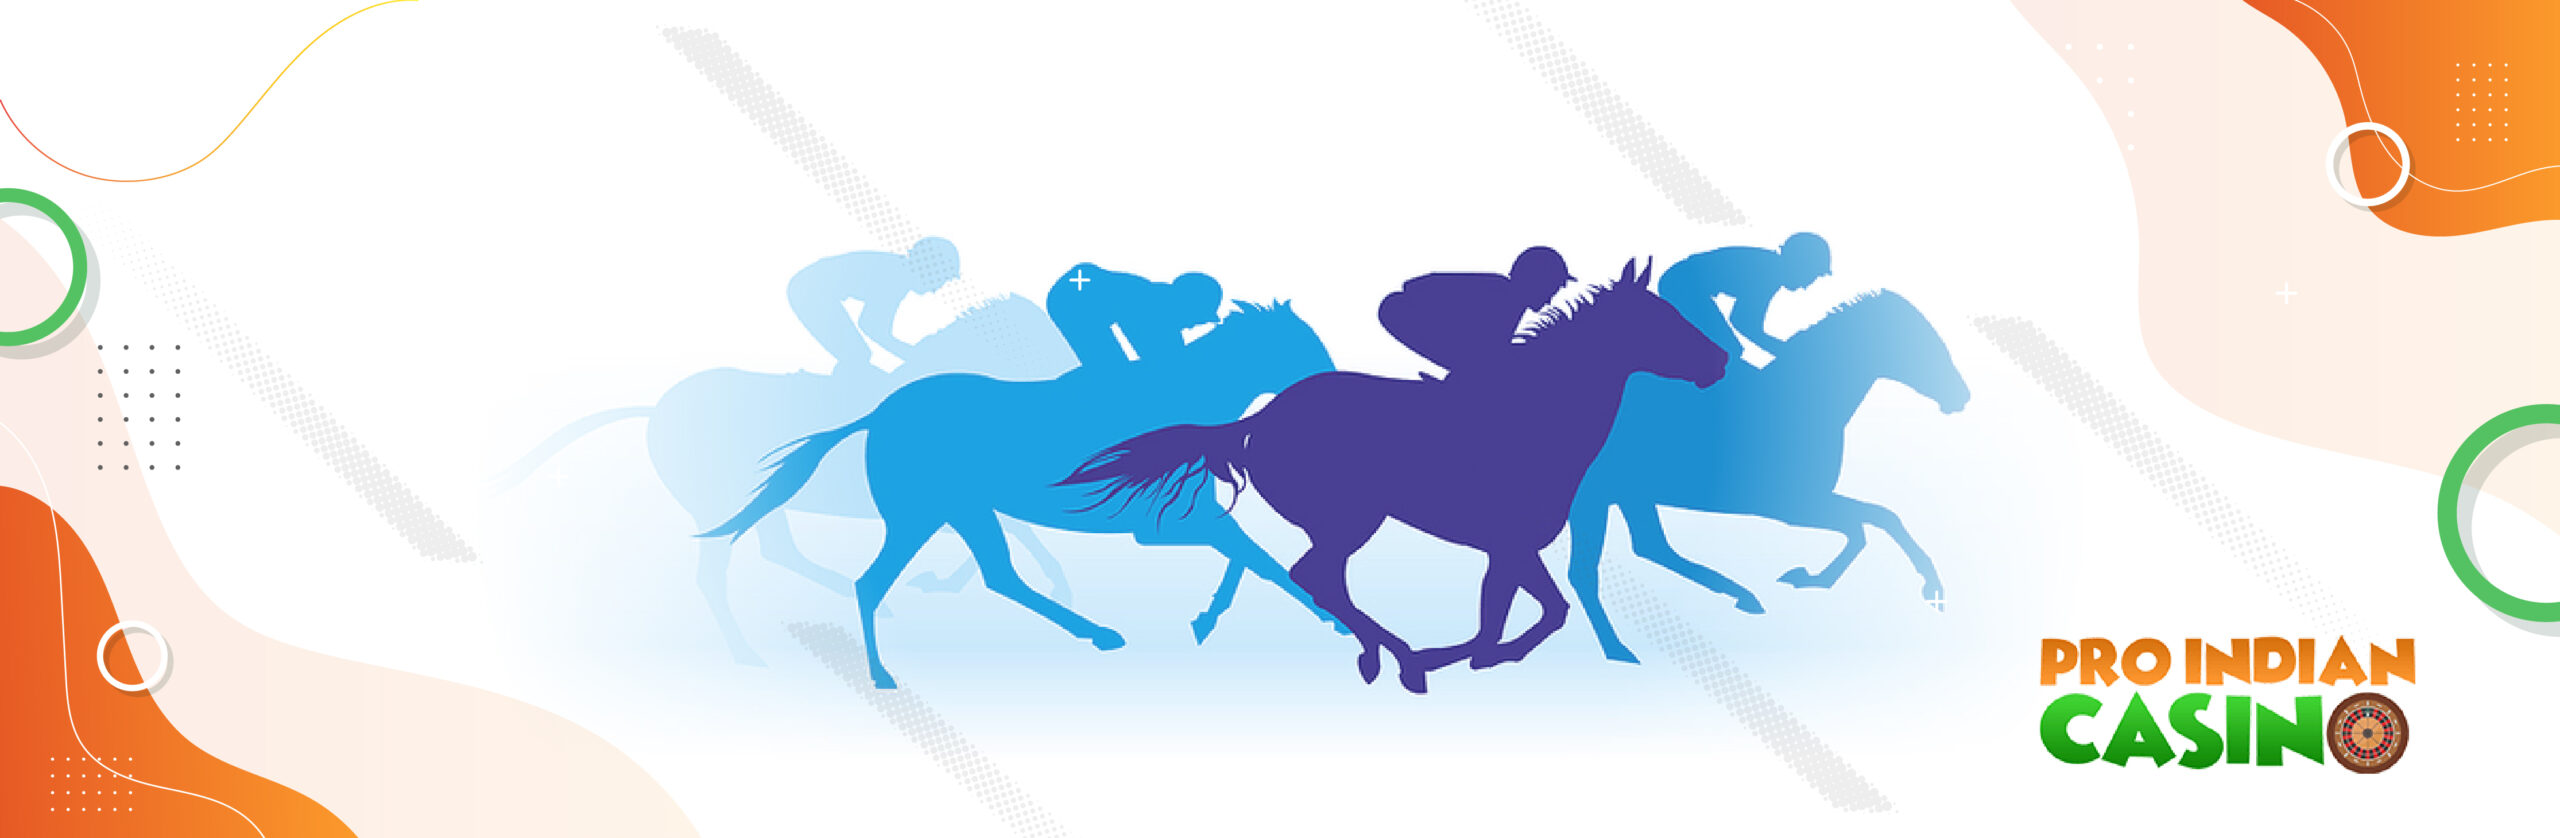 horse betting sites